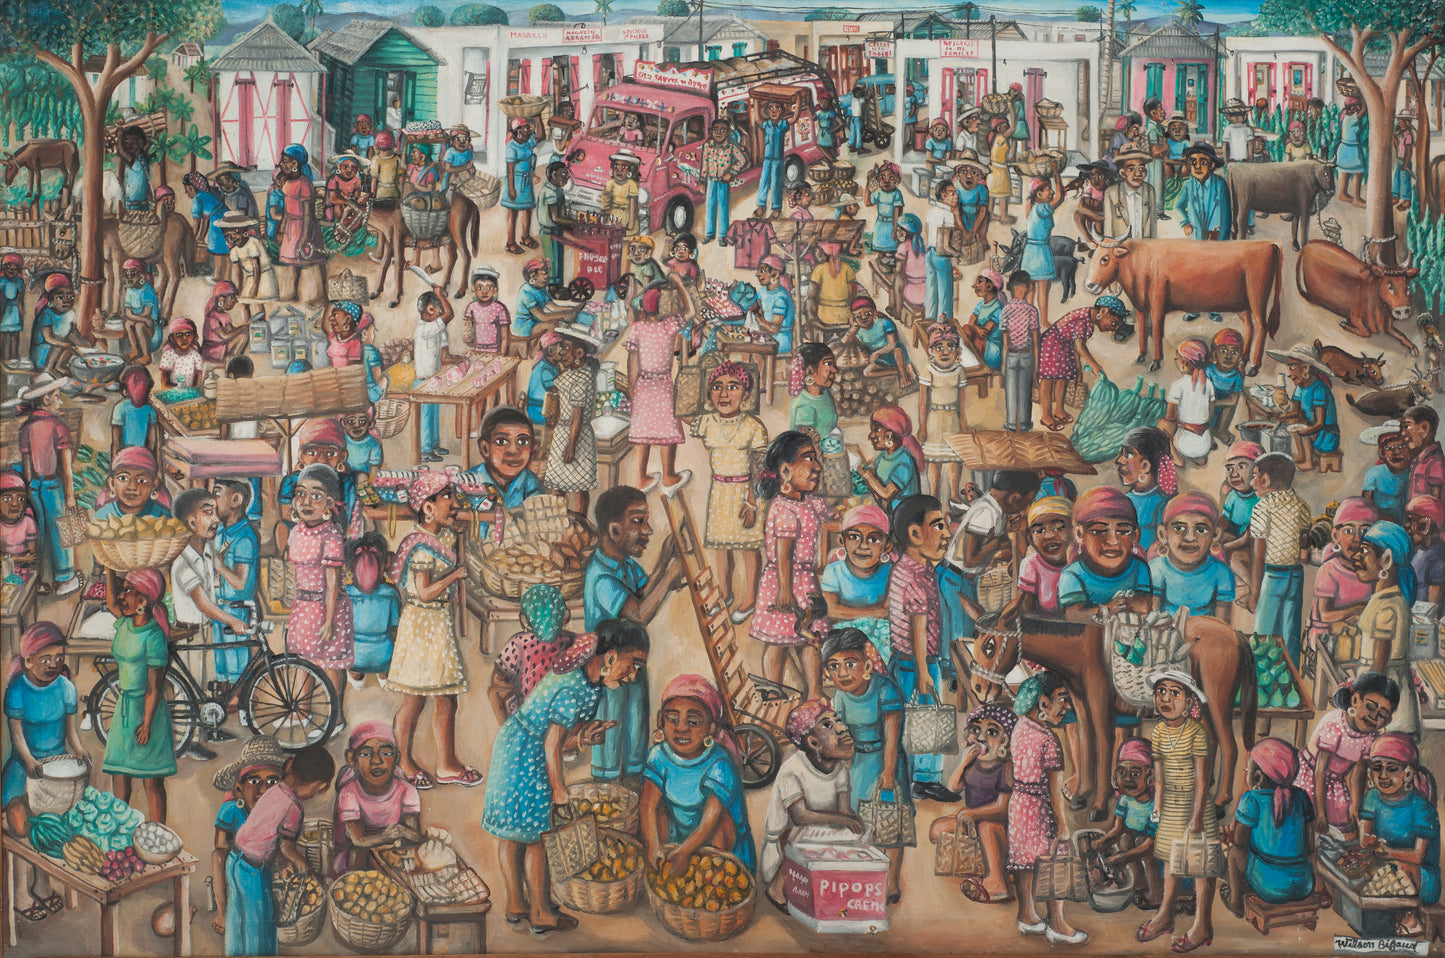 Wilson Bigaud (Haitian, 1931-2010) 40"x60" Busy Market c1980 Oil on Canvas Unframed Painting #6-3-96GSN-Fondation Marie & Georges S. Nader